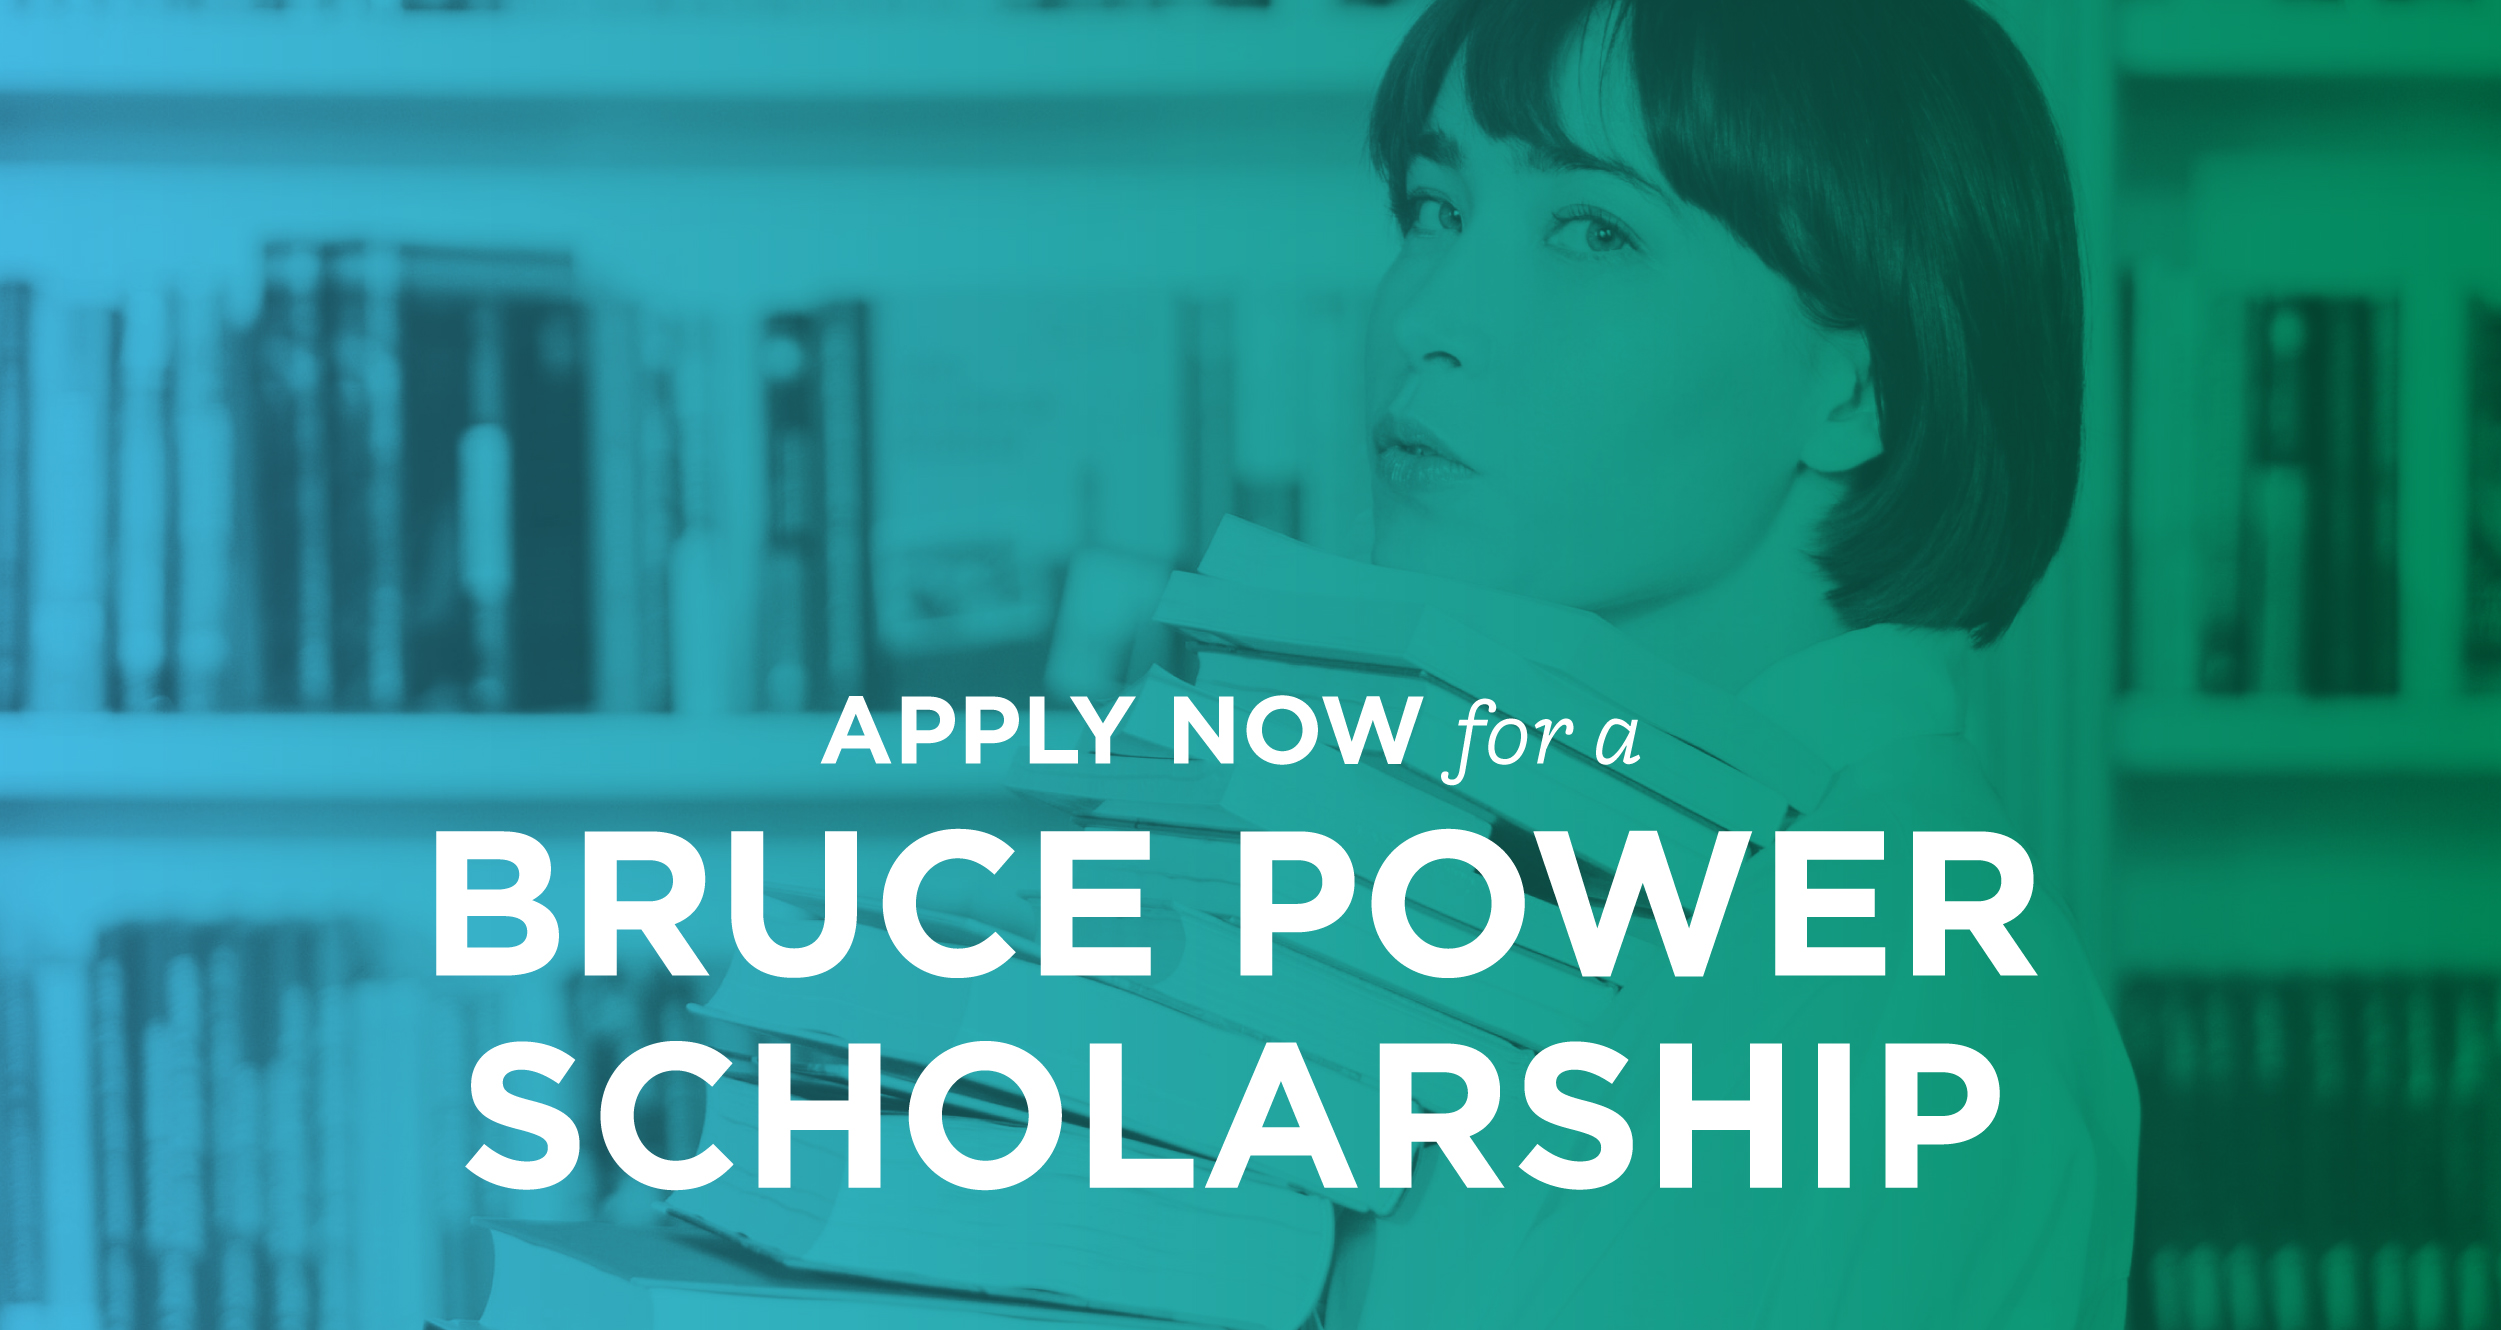 bruce-power-offers-100-000-in-post-secondary-scholarships-elementary-school-awards-bruce-power